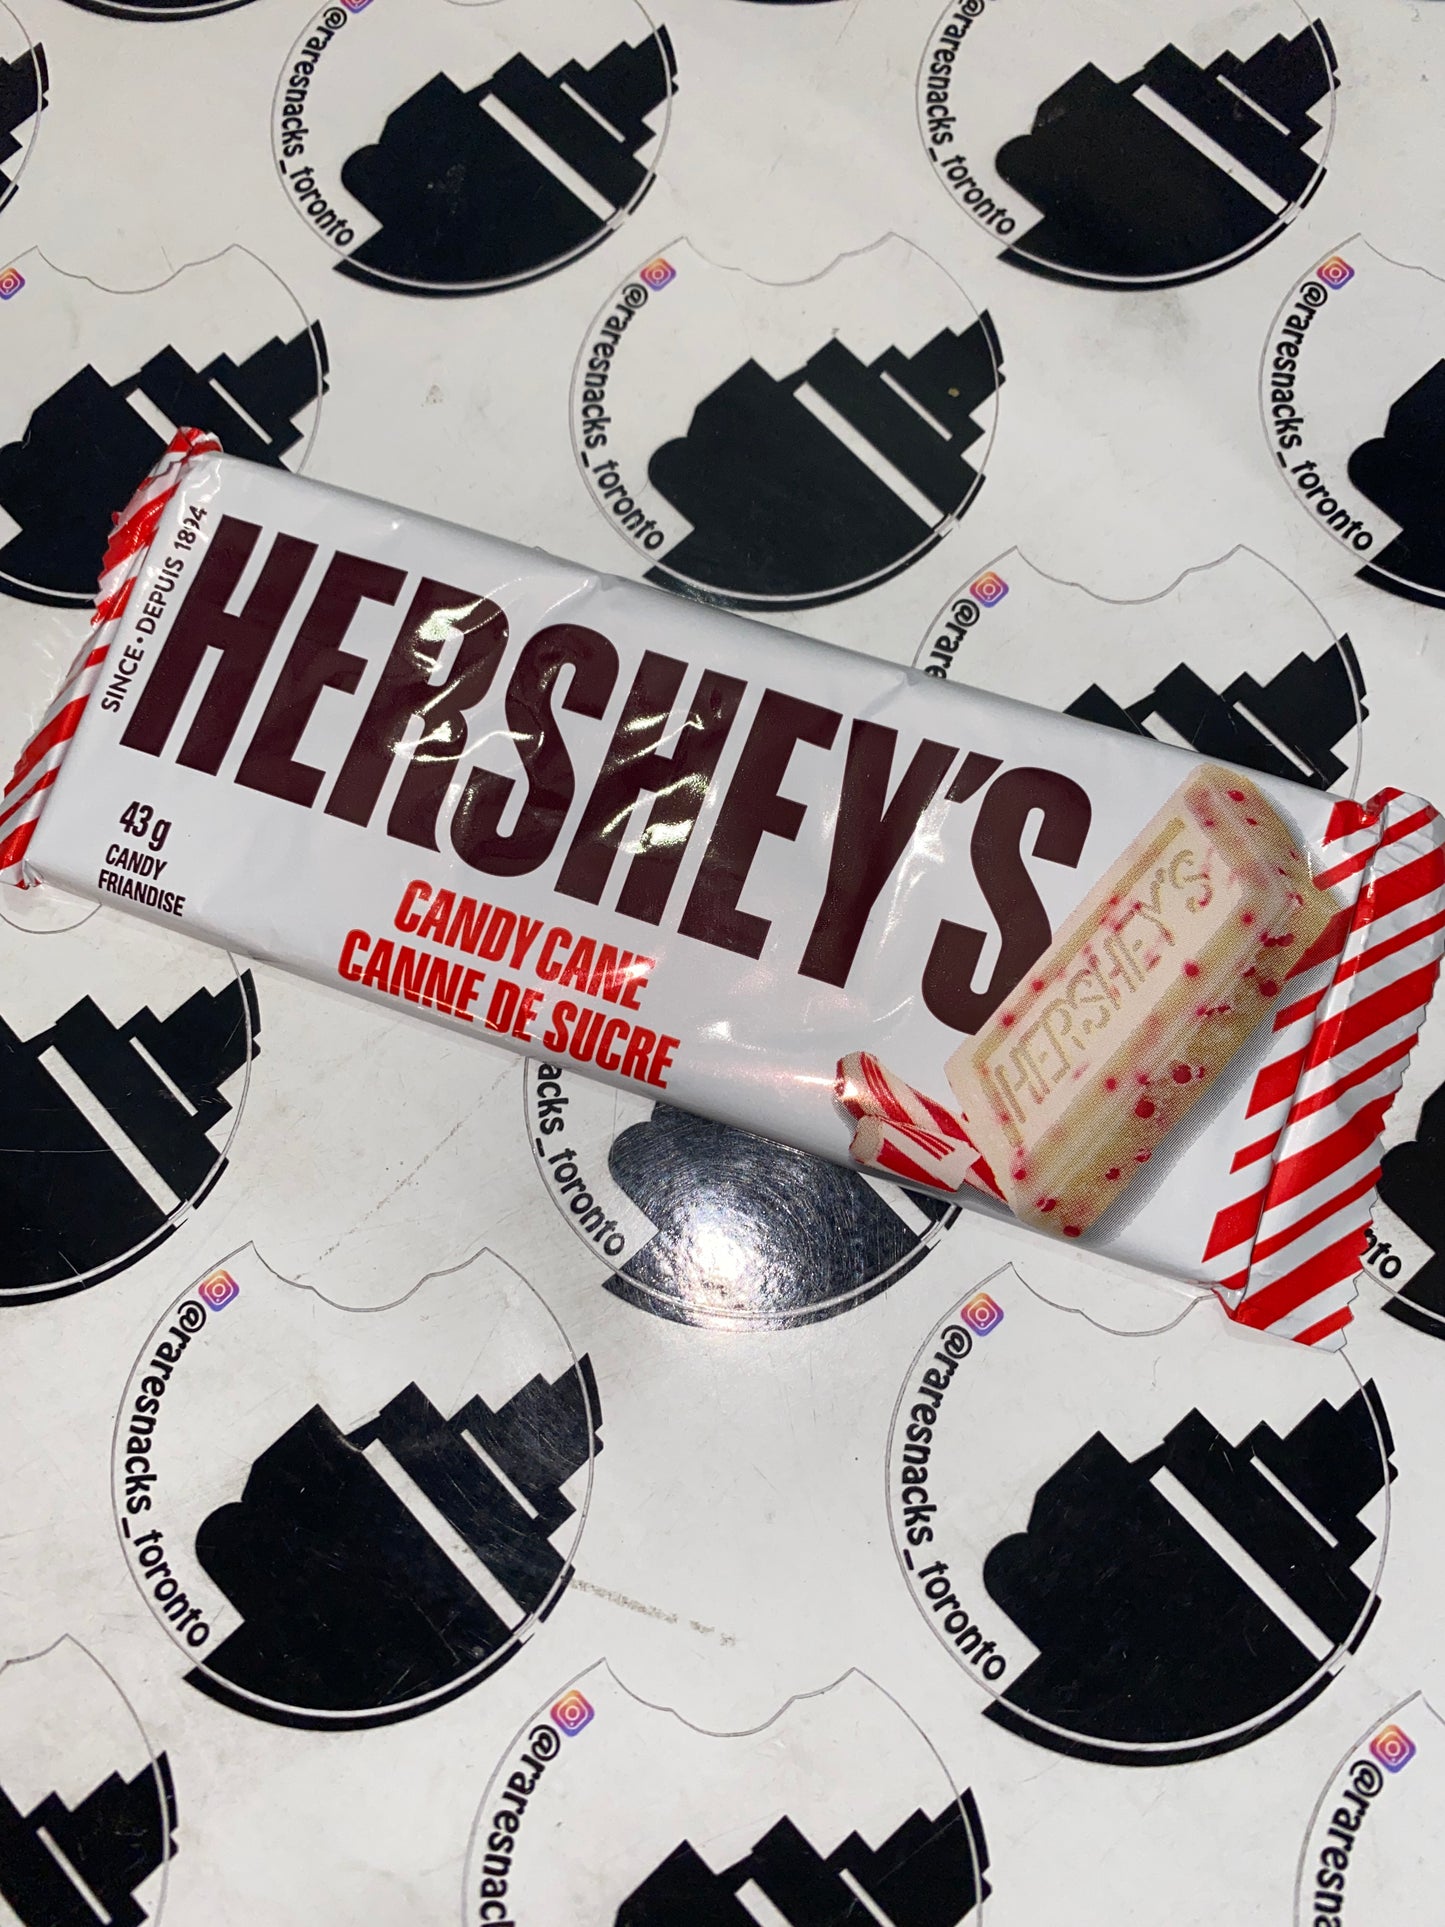 Hershey’s candy cane 43g